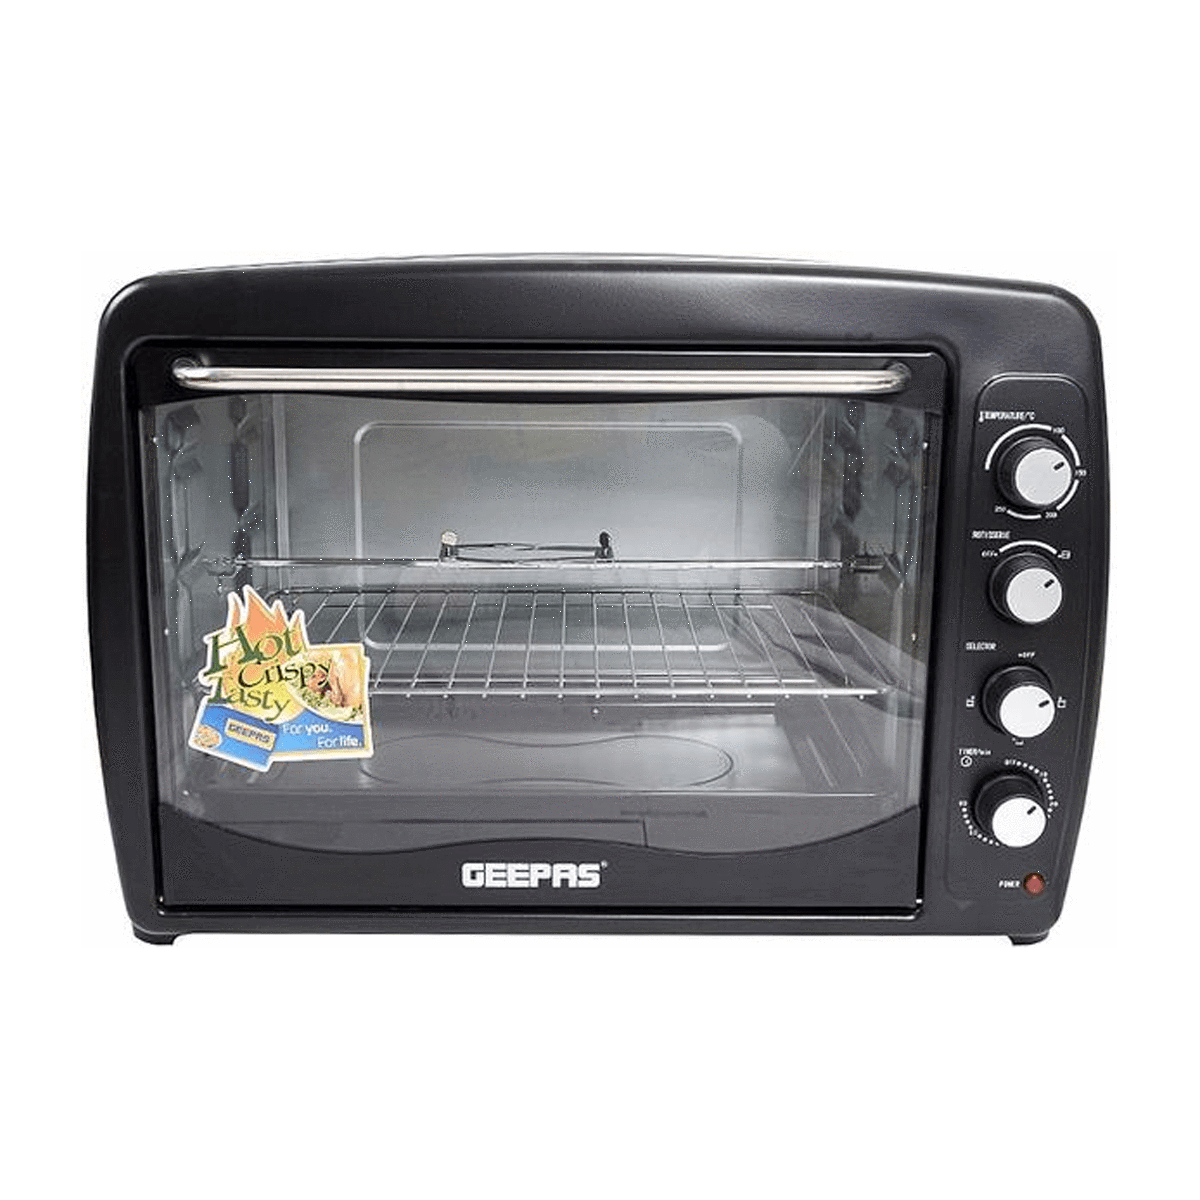 Geepas Electric Oven with Grill, Black [GO4401]